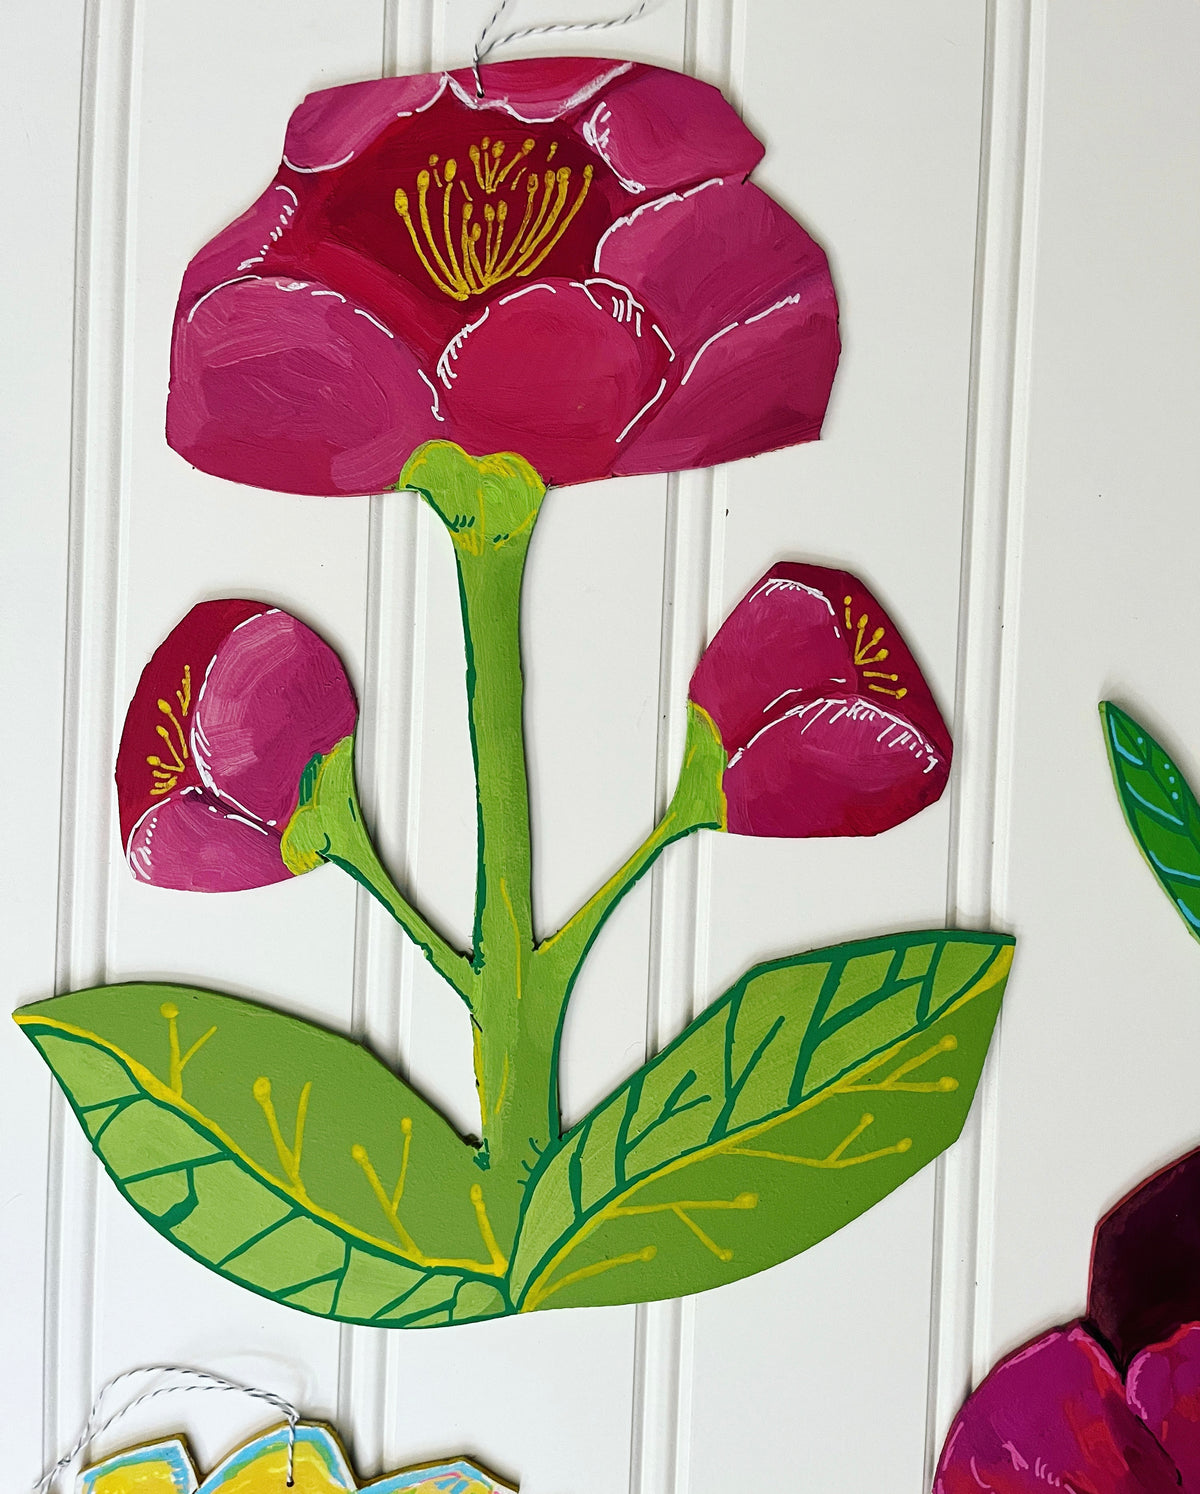 cutout wooden flower painting, by artist Abigail Gray Swartz. Three peony flowers, acrylic on panel.